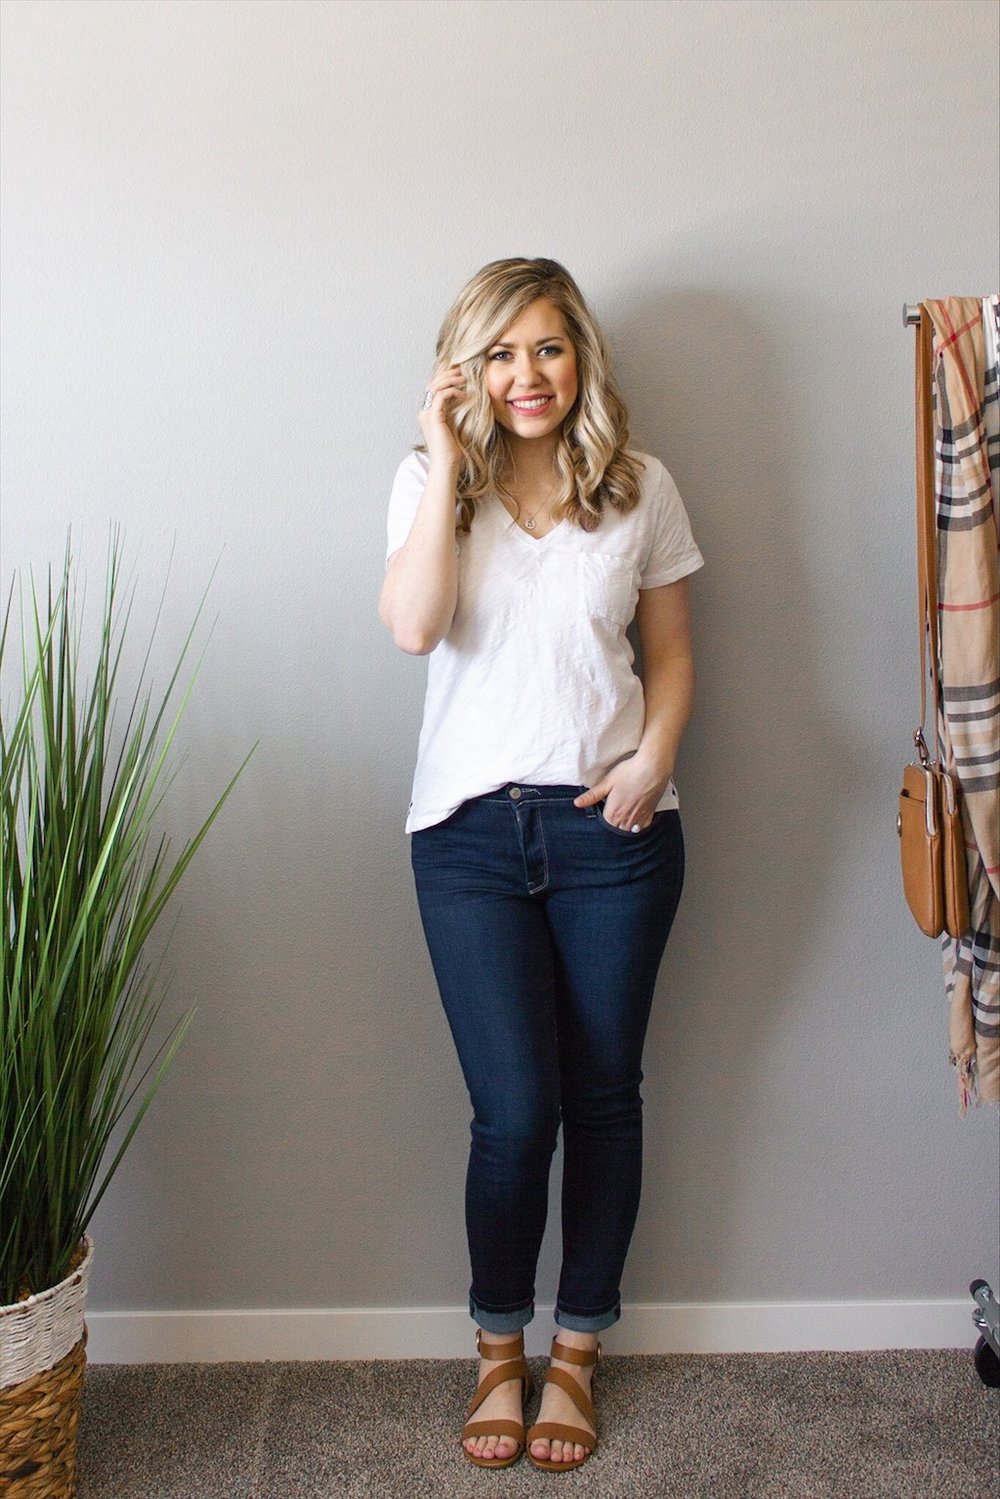 cilia stivhed kjole 3 Ways to Style a White Tee + Jeans Outfit — Adrianna Bohrer